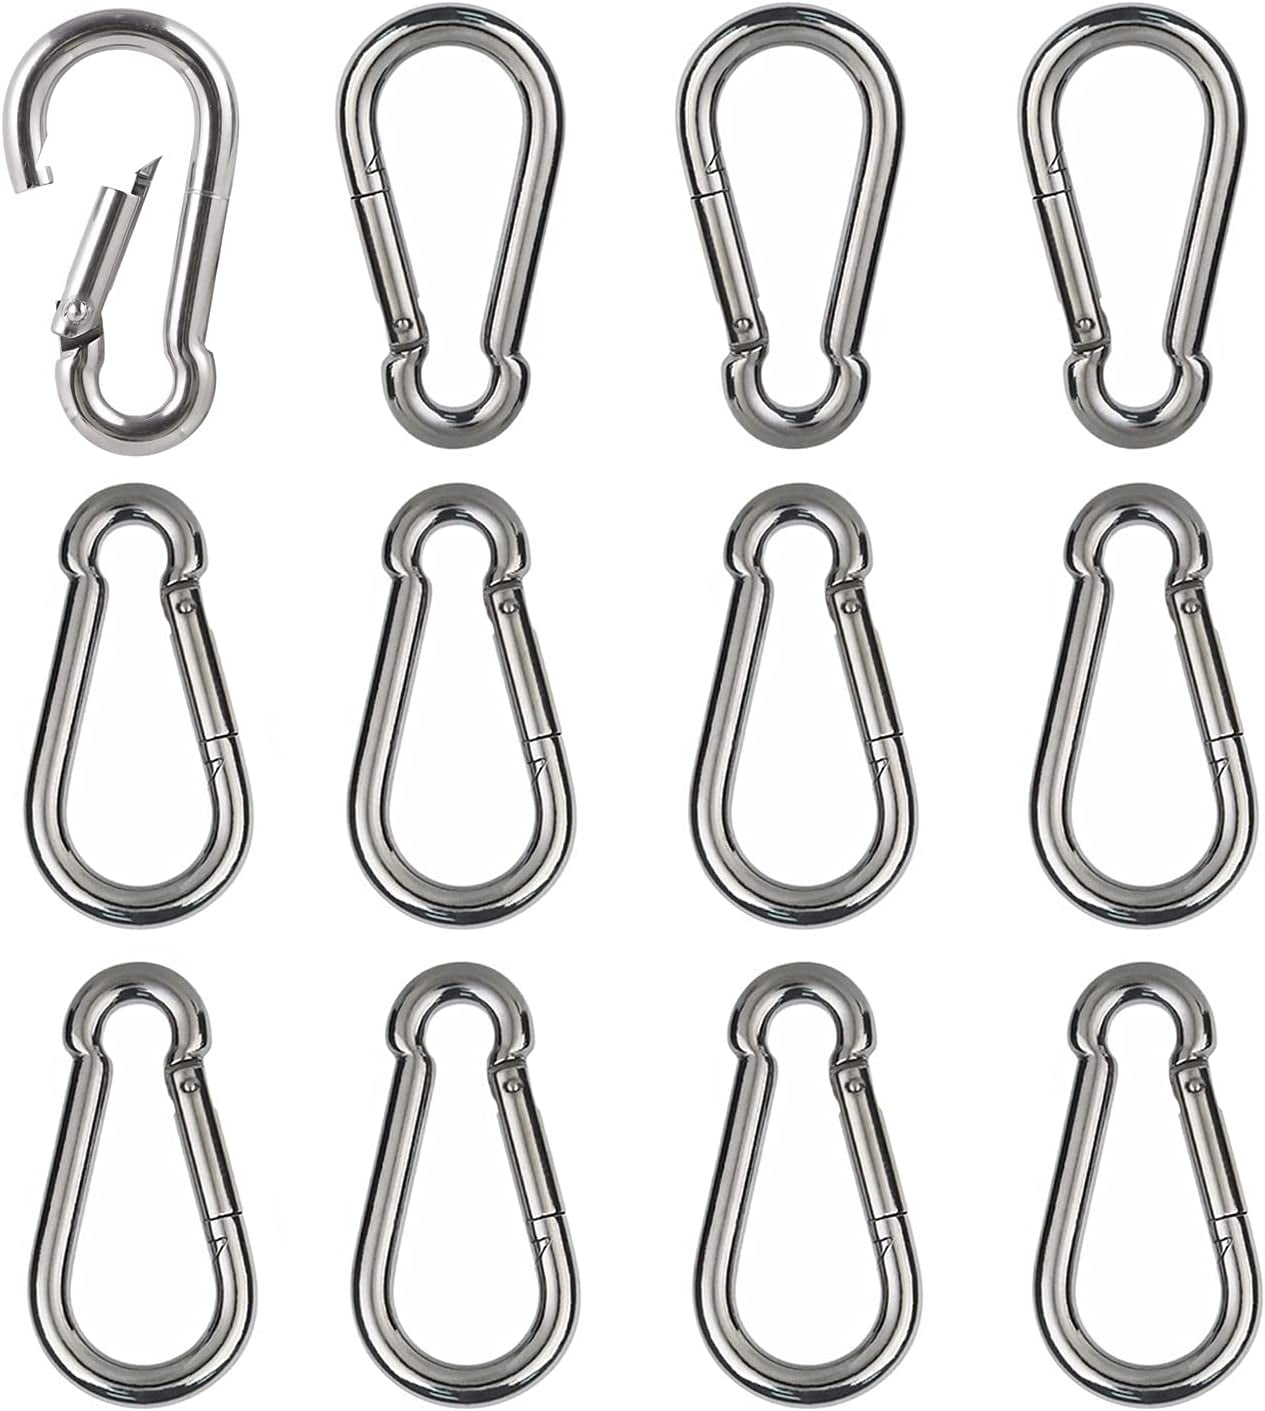 Small Carabiner Spring Snap Hook - M4 1.57 Inch Stainless Steel